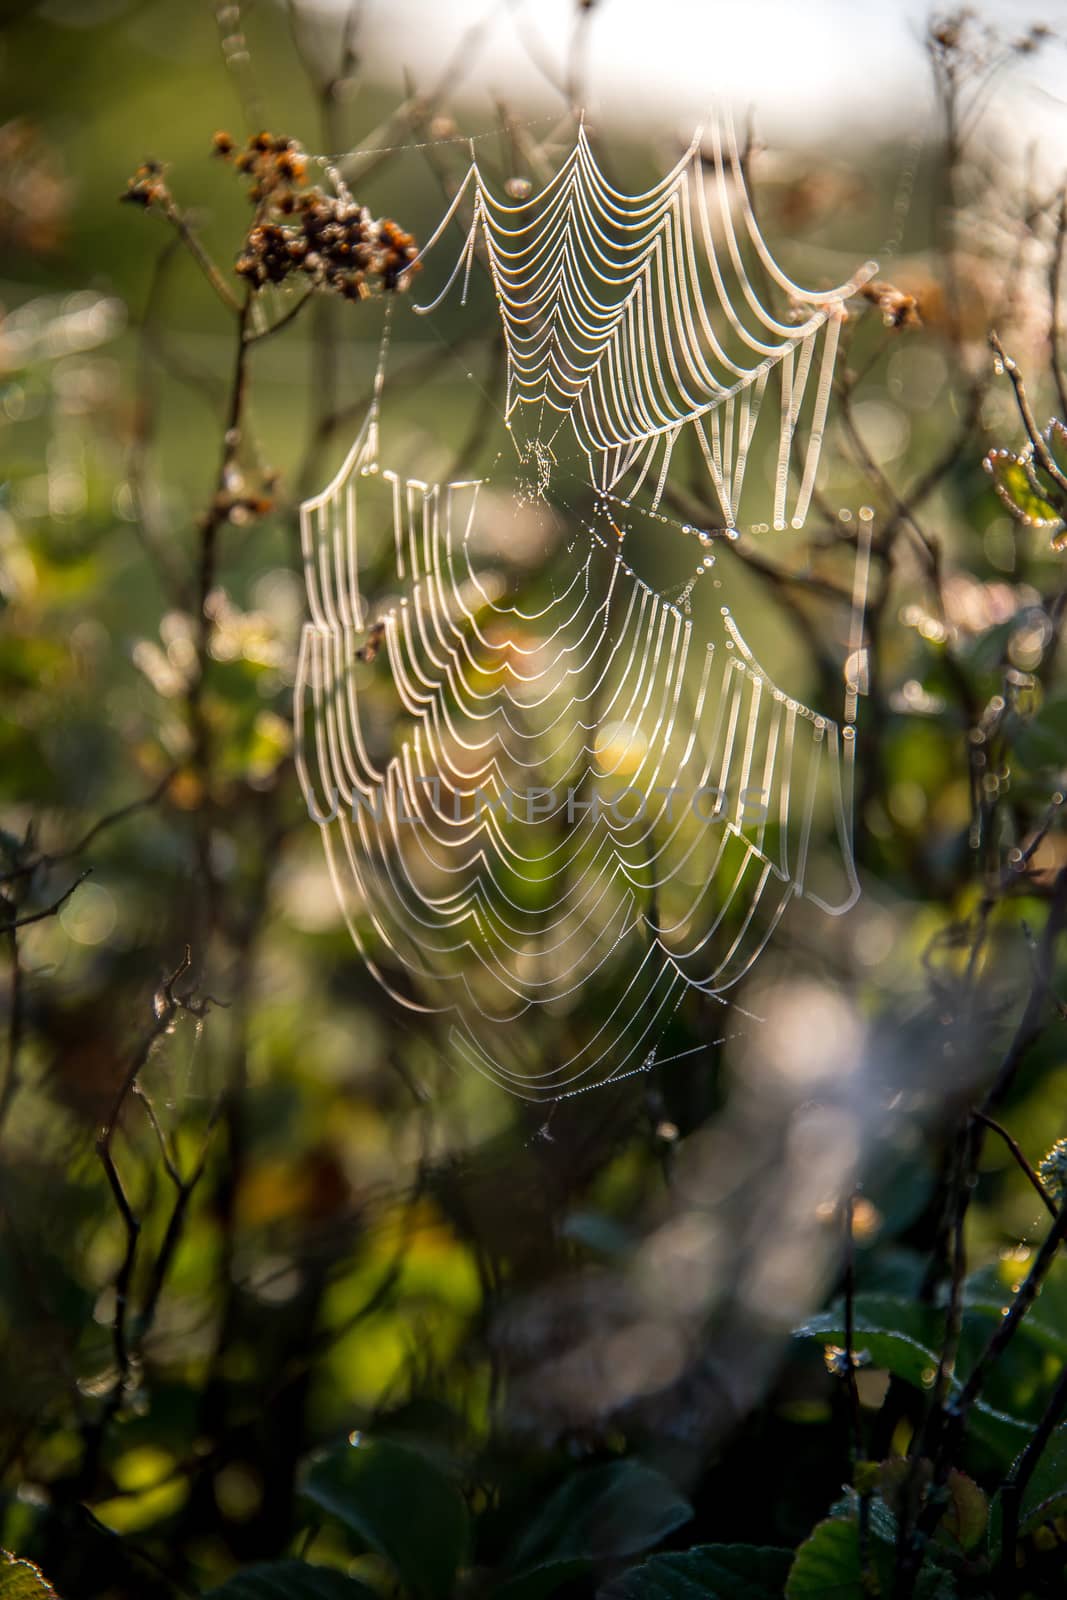 Dew drops on spider web in forest. by fotorobs